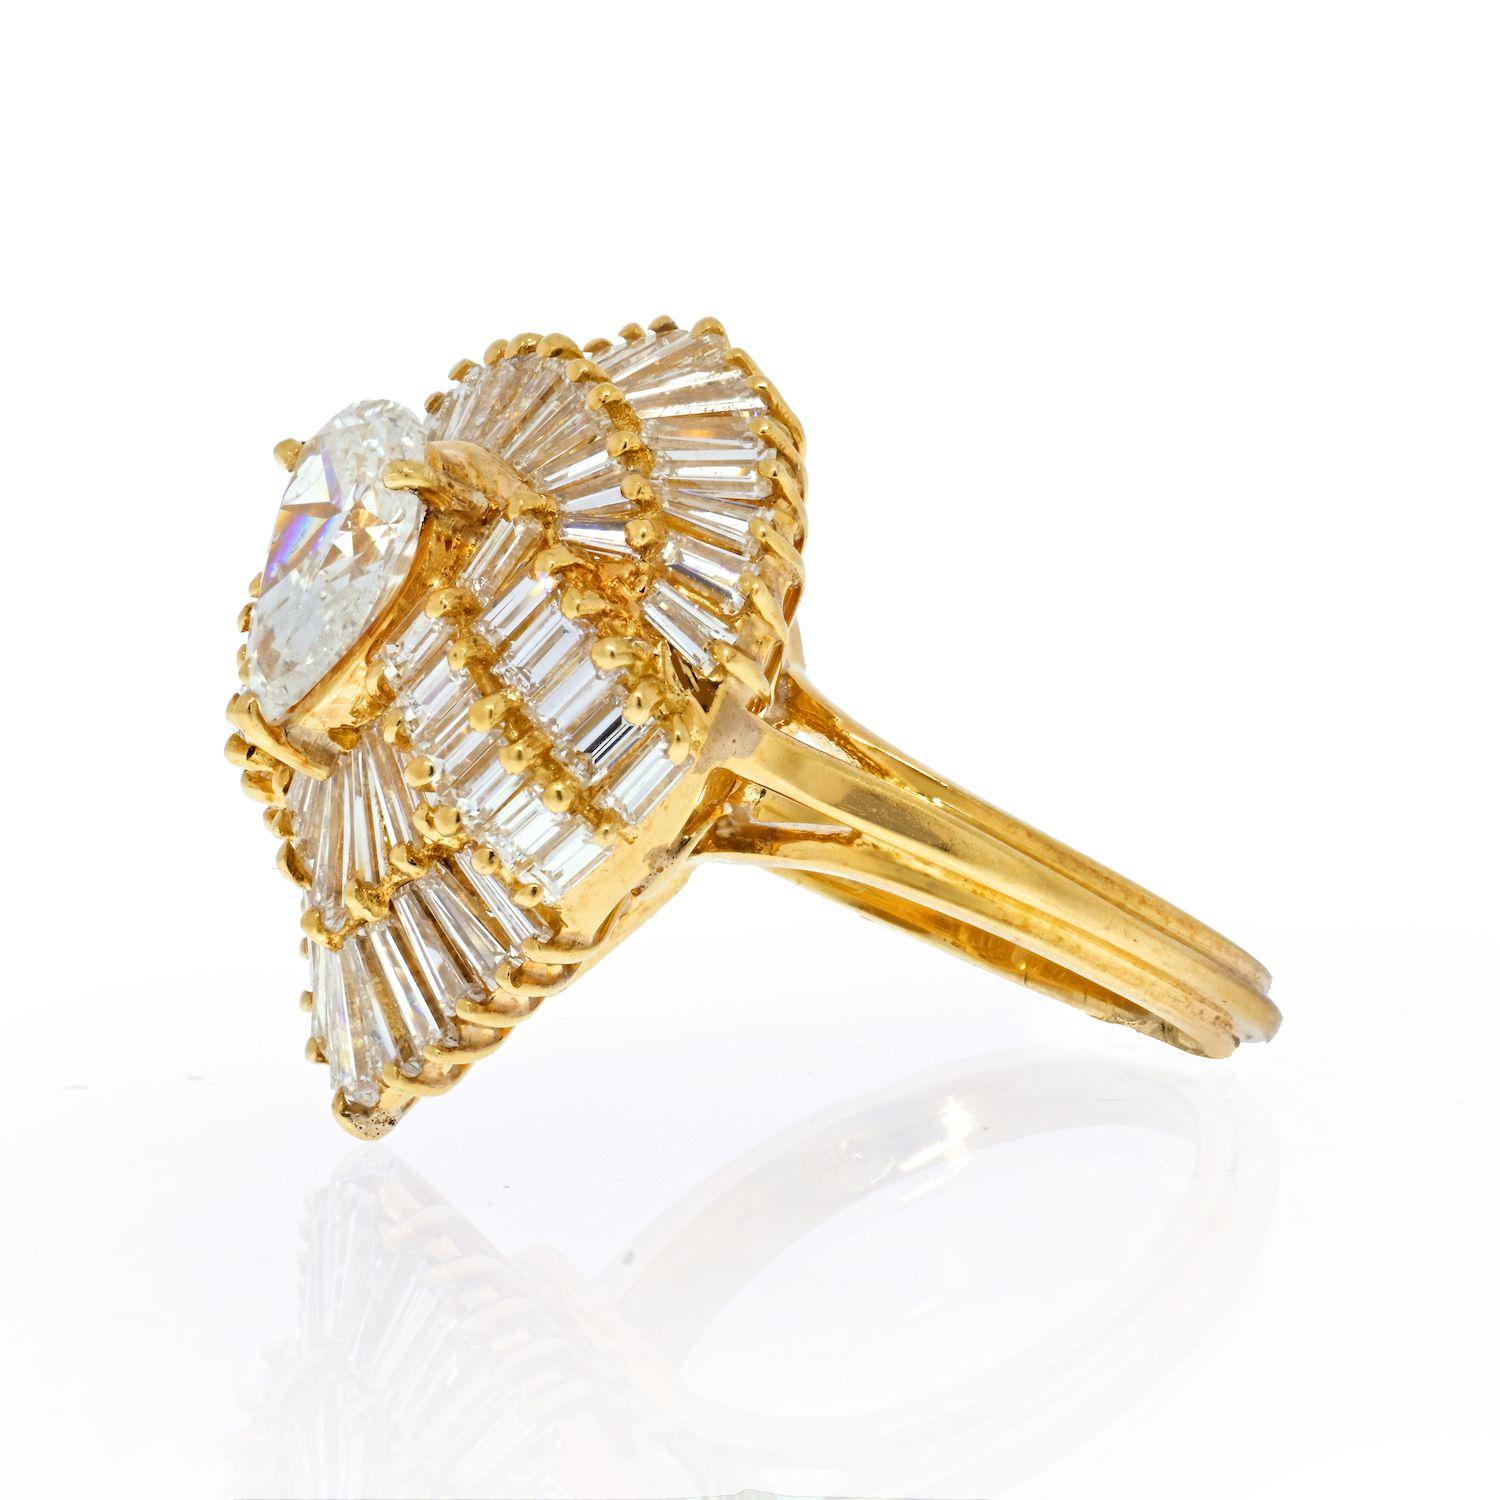 This shimmering 18k yellow gold diamond ring is crafted centering 1.27 carat Pear-Cut diamond. Surrounded by a double halo of baguette cut diamonds weighing approx. 3.50 carats, graded H-I color, and VS1-VS2 clarity. 
Top measures: 23mm x 18mm. Ring